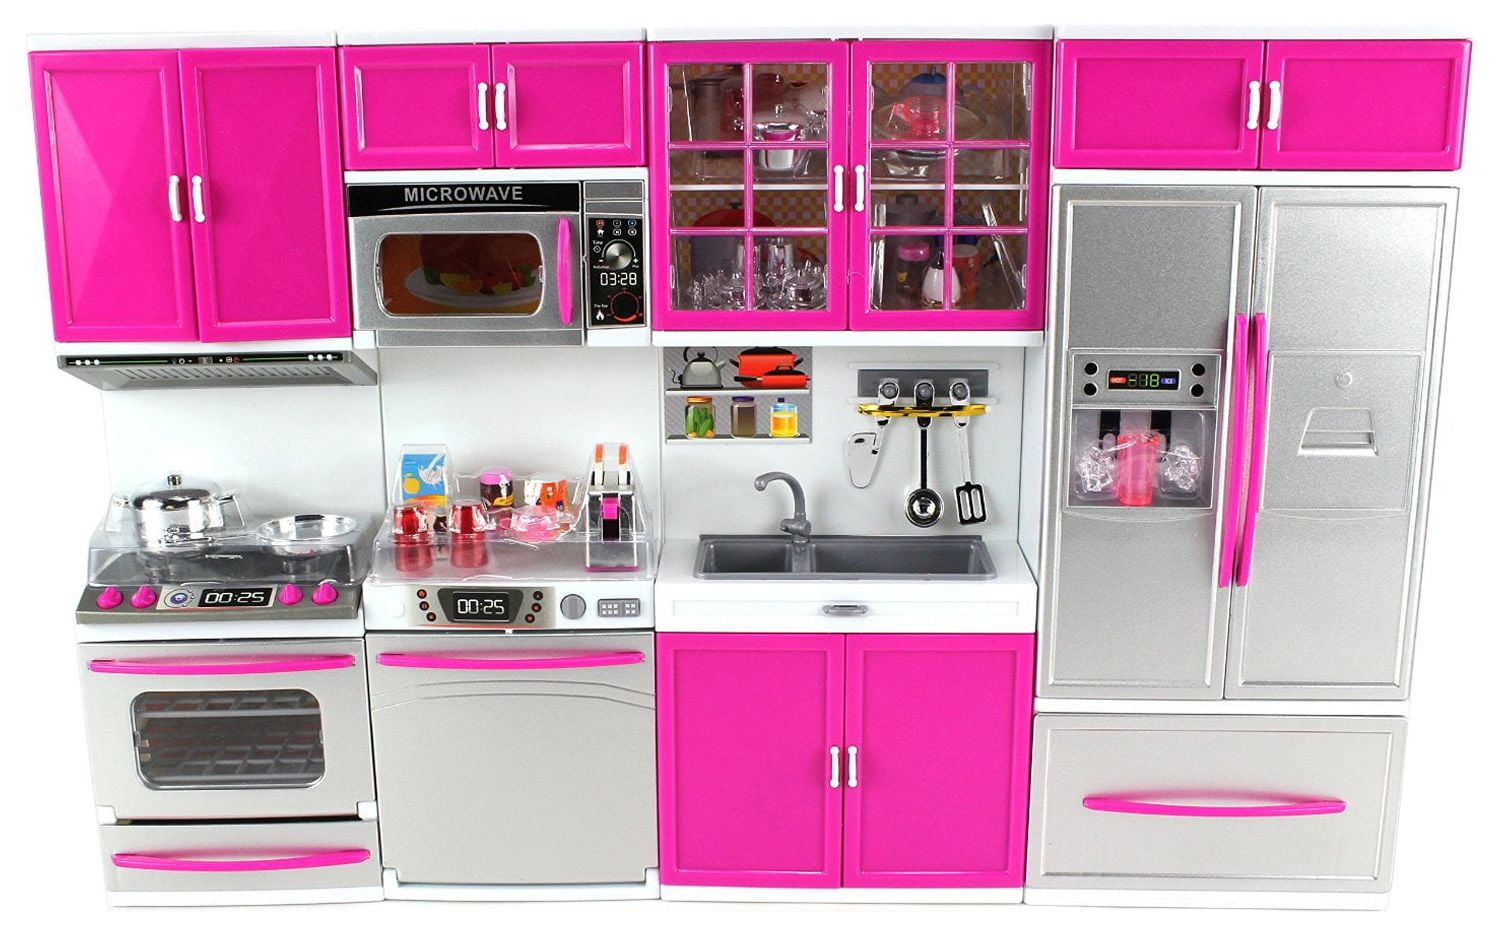 Kitchen Connection My Modern Kitchen Full Deluxe Kit Kitchen Playset: Refrigerator, Stove, Microwave - Pink & Silver-13.5 x 12